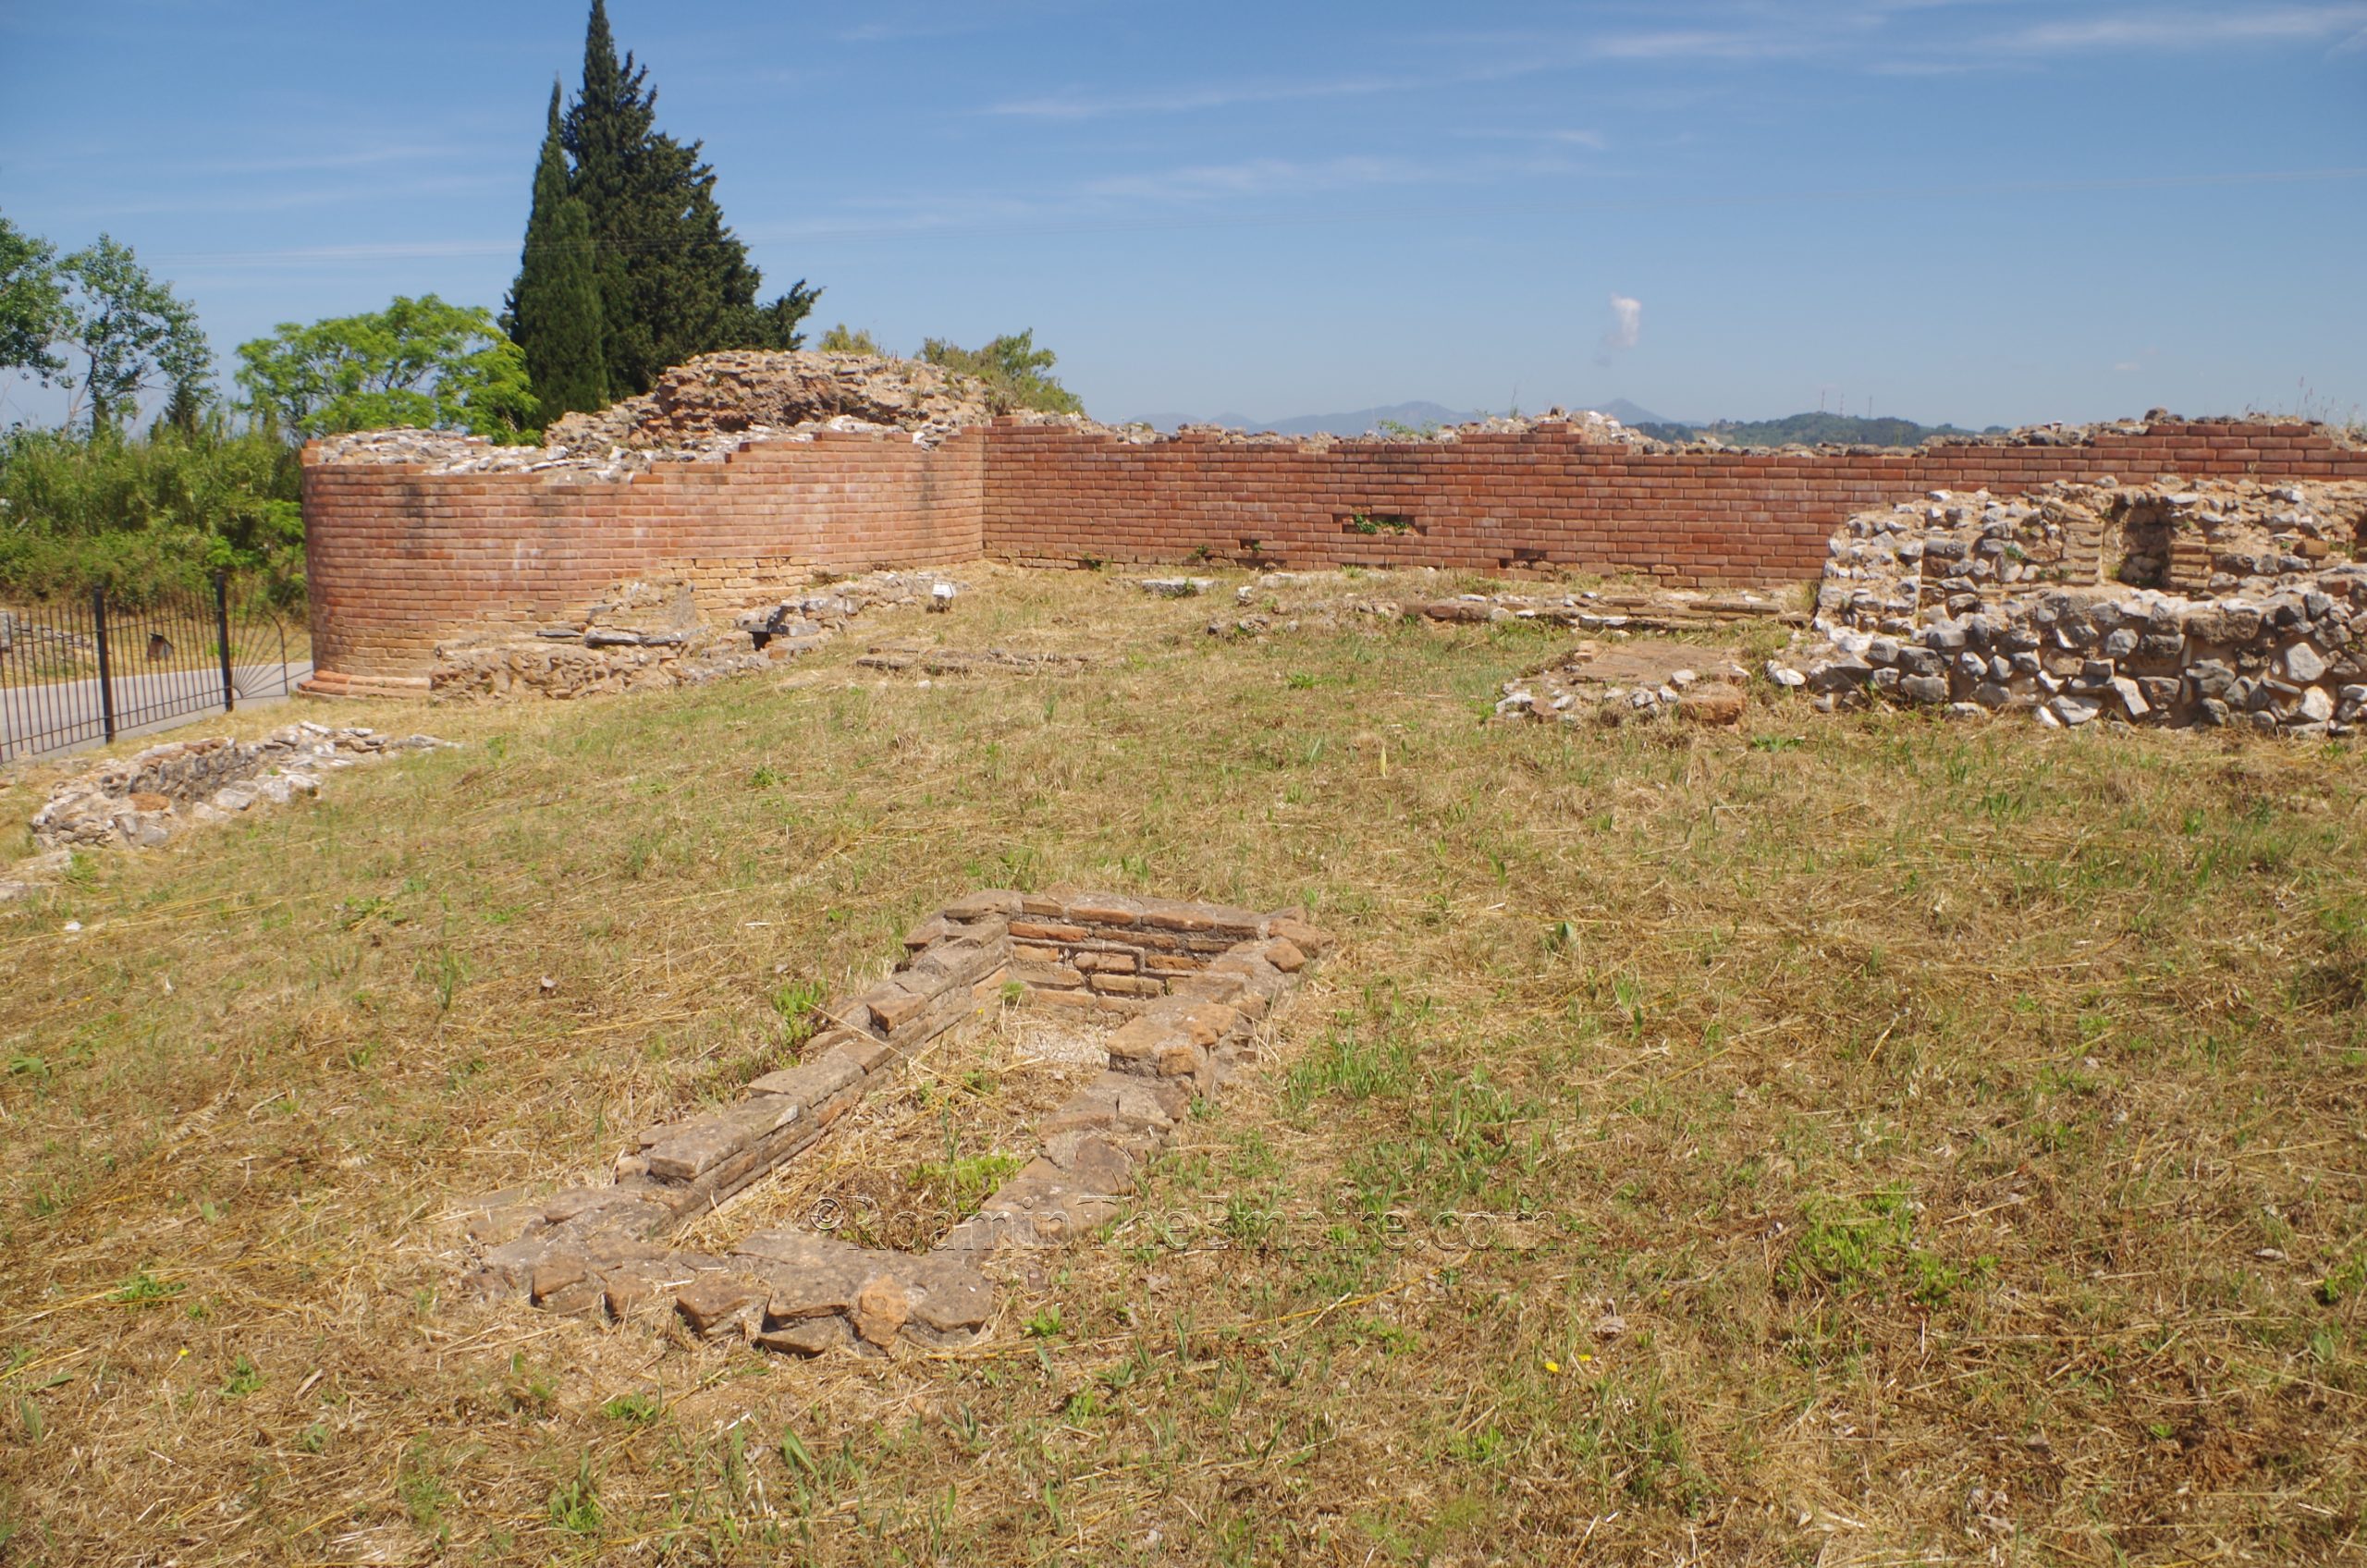 South gate of the 1st century walls and graves.